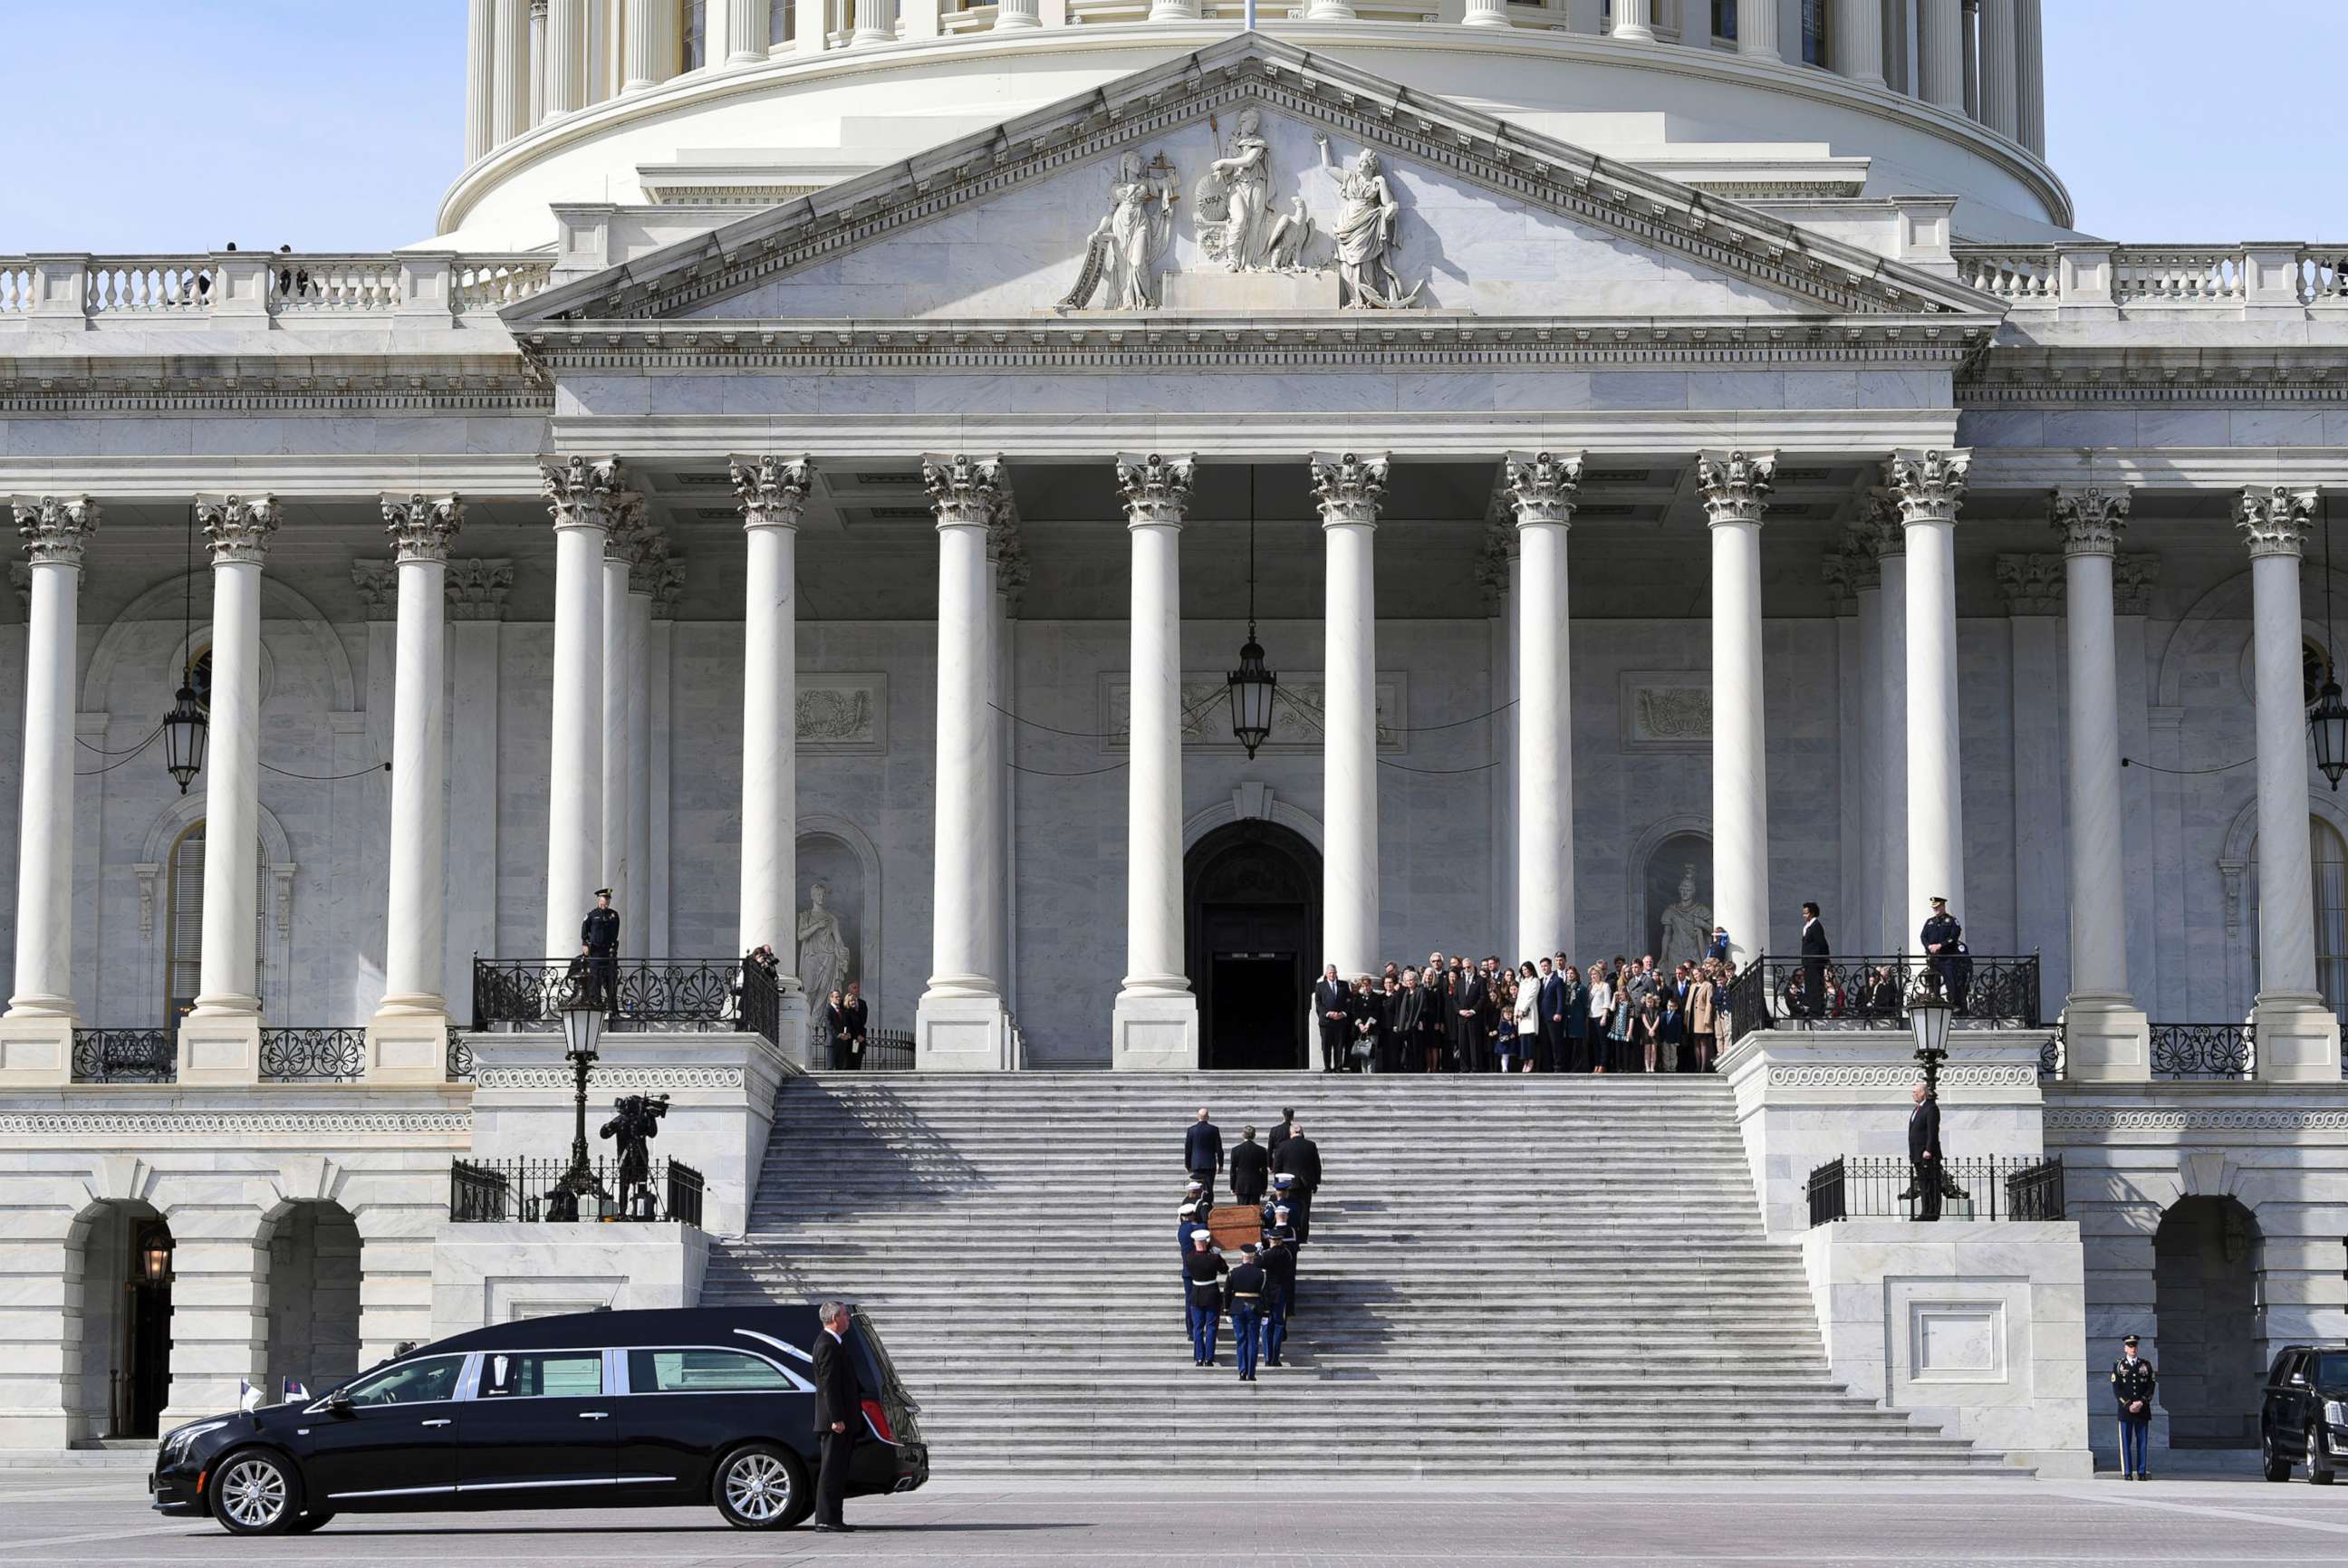 PHOTO: The casket of Rev. Billy Graham is carried up the steps of the U.S. Capitol in Washington, D.C., Feb. 28, 2018, where it will lie in honor.